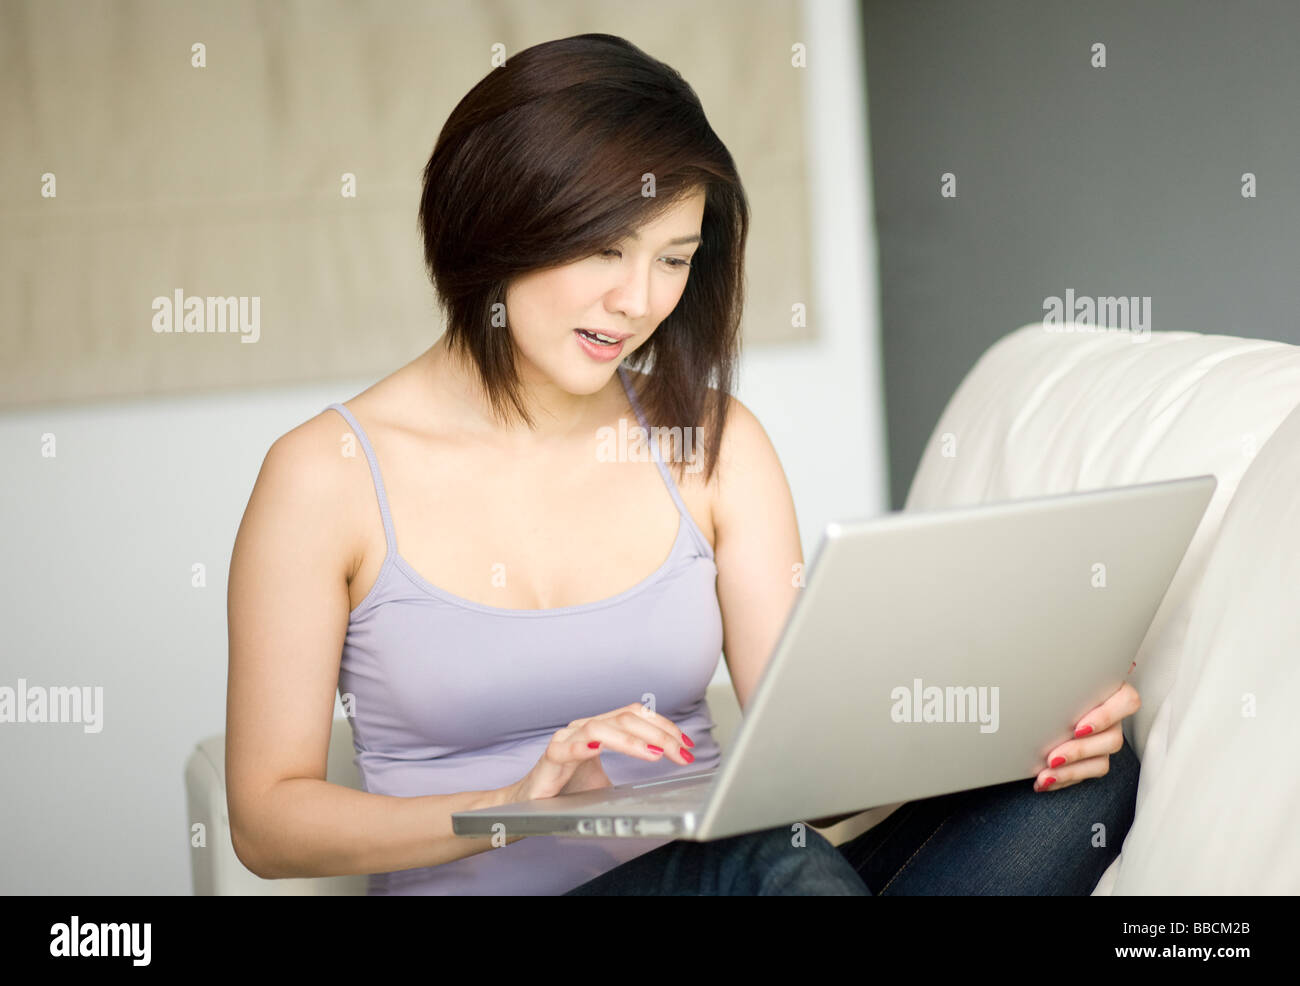 Young female using laptop in her home Stock Photo